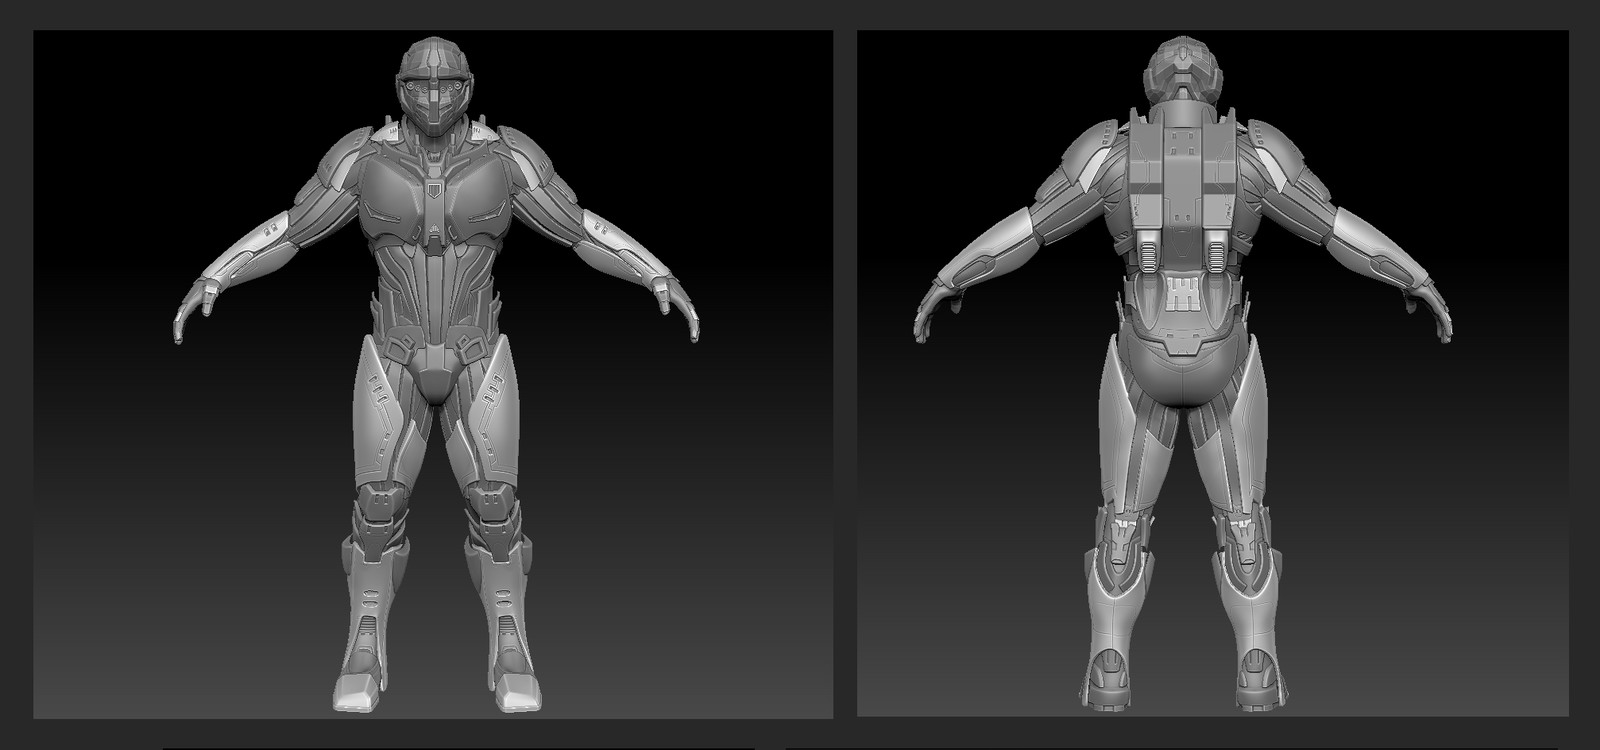 High resolution body mesh by me.
Helmet by Andrew Westwood.